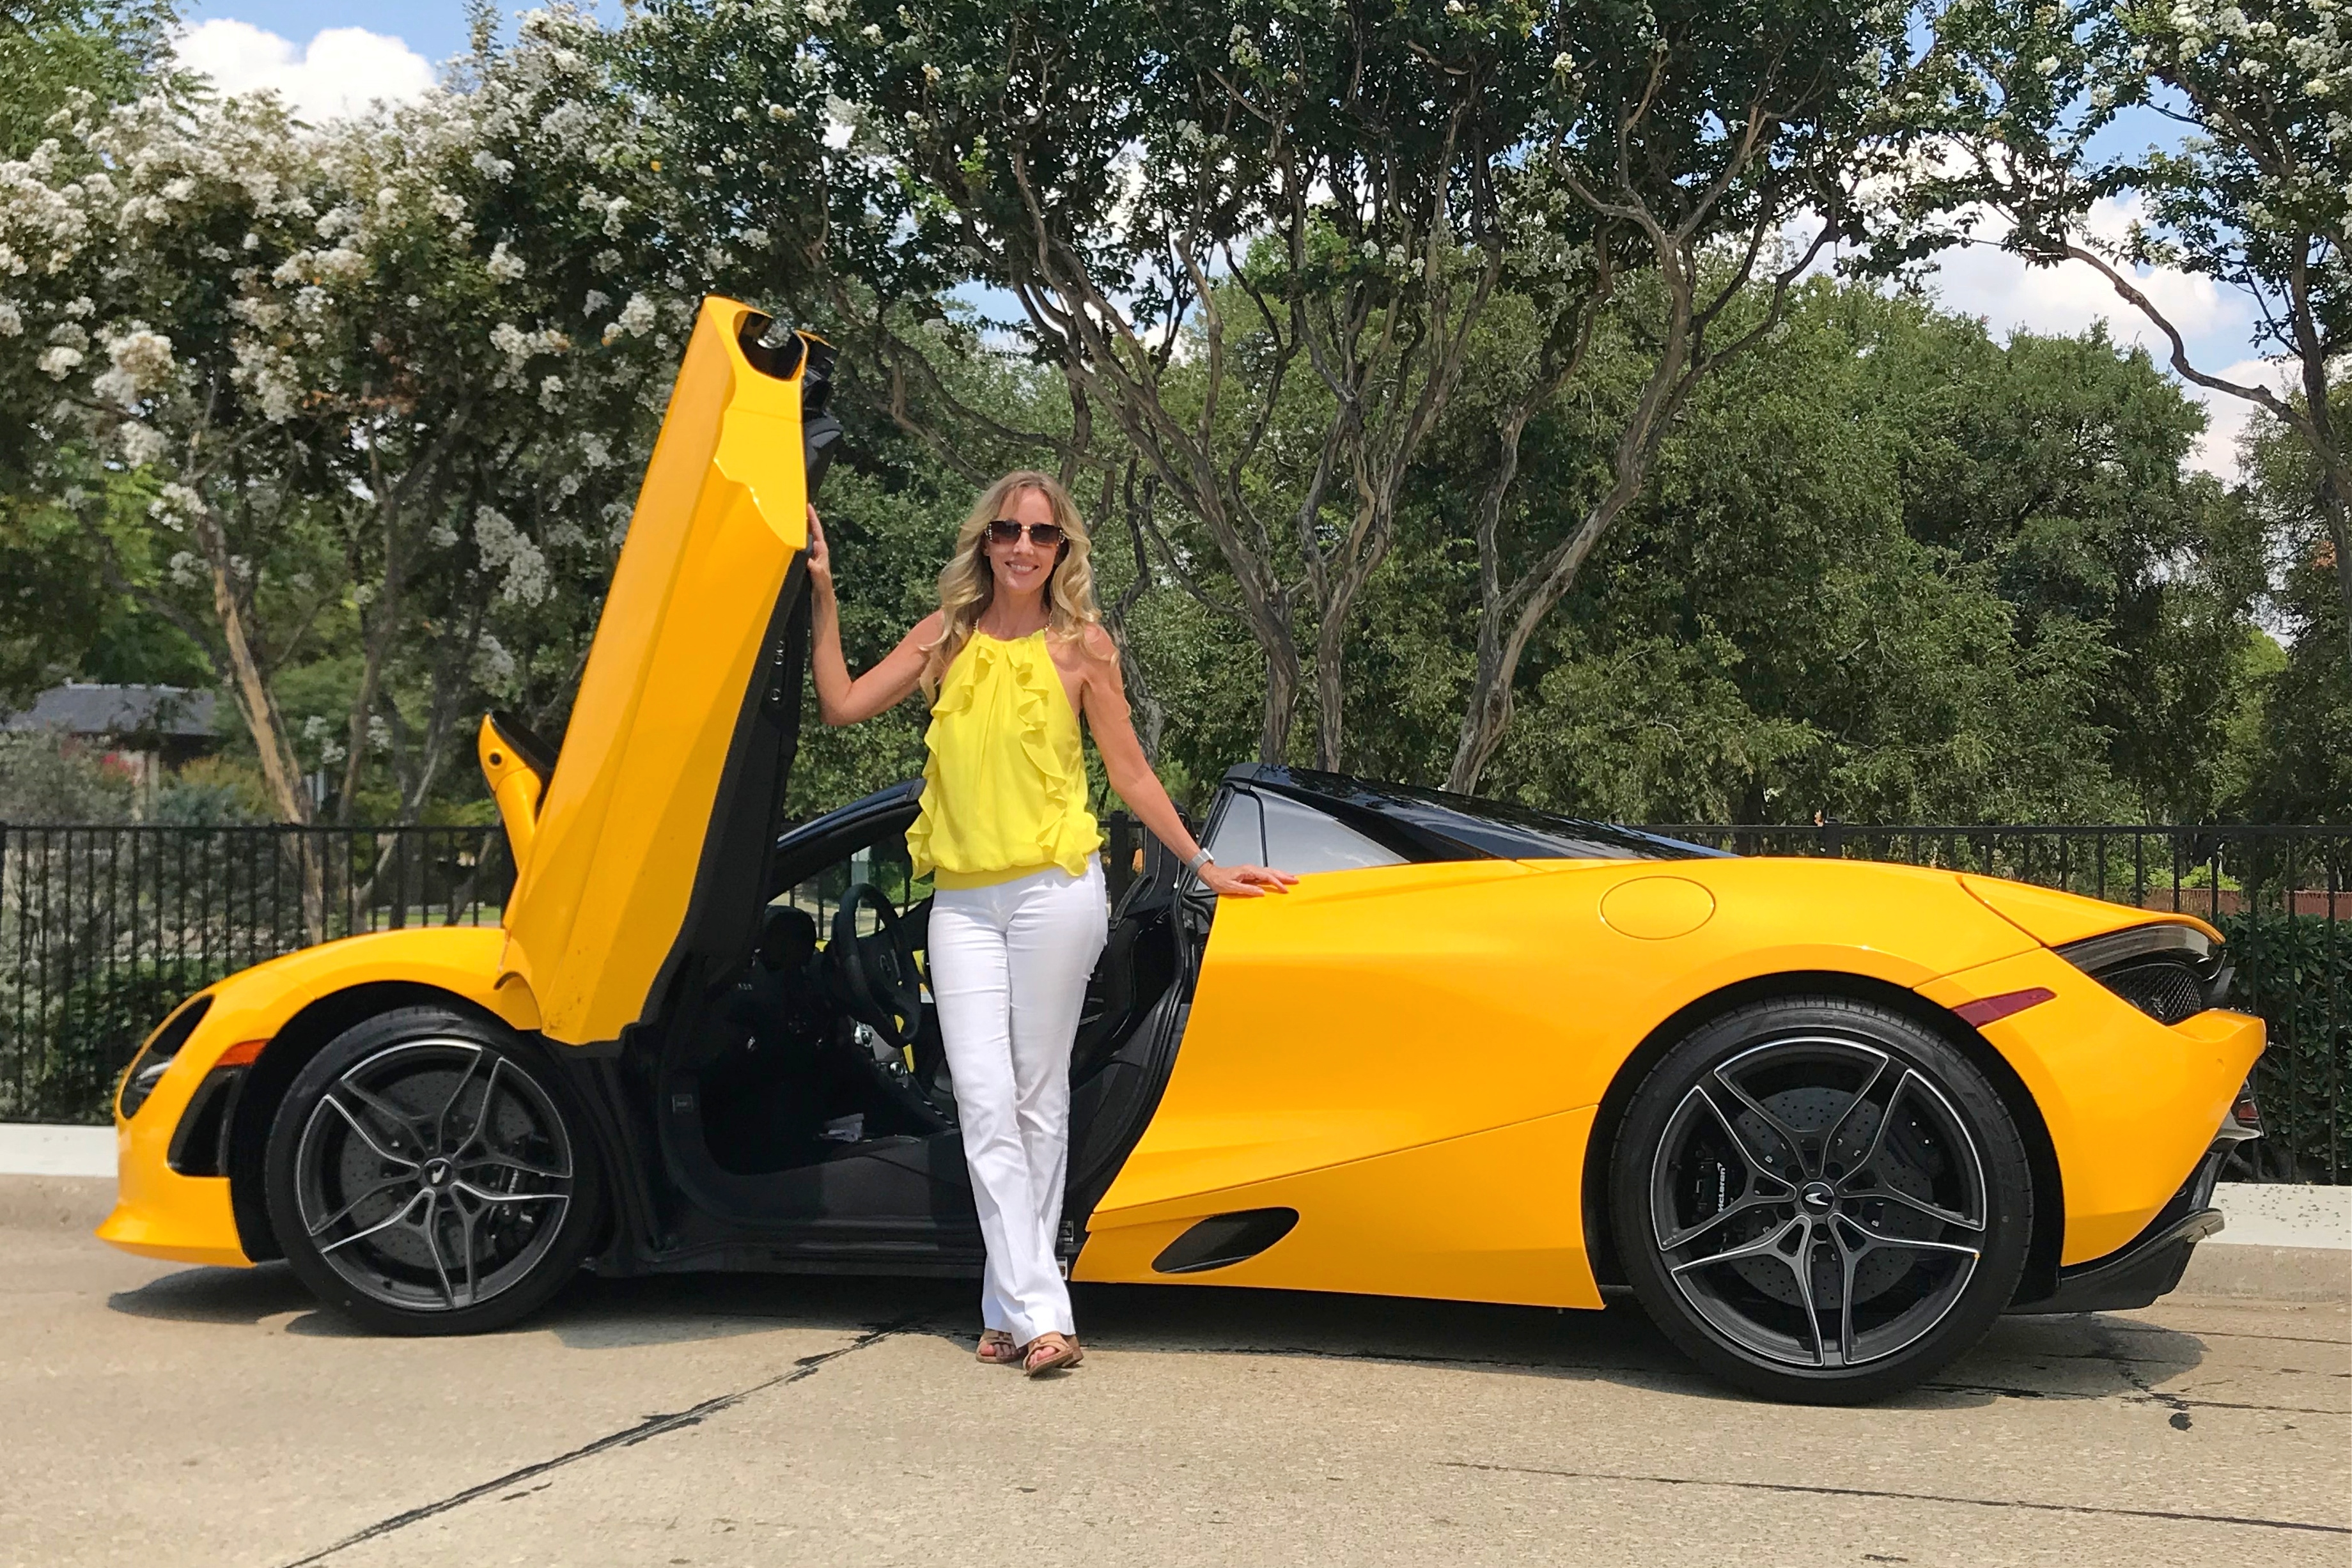 Motor Vehicles | Exotic Automobile Car Rental, Motorcycle Rentals, NASCAR Driving Experiences, Dream Car Tour Experiences | Life and Leisure | Dallas/Fort Worth, Texas, USA